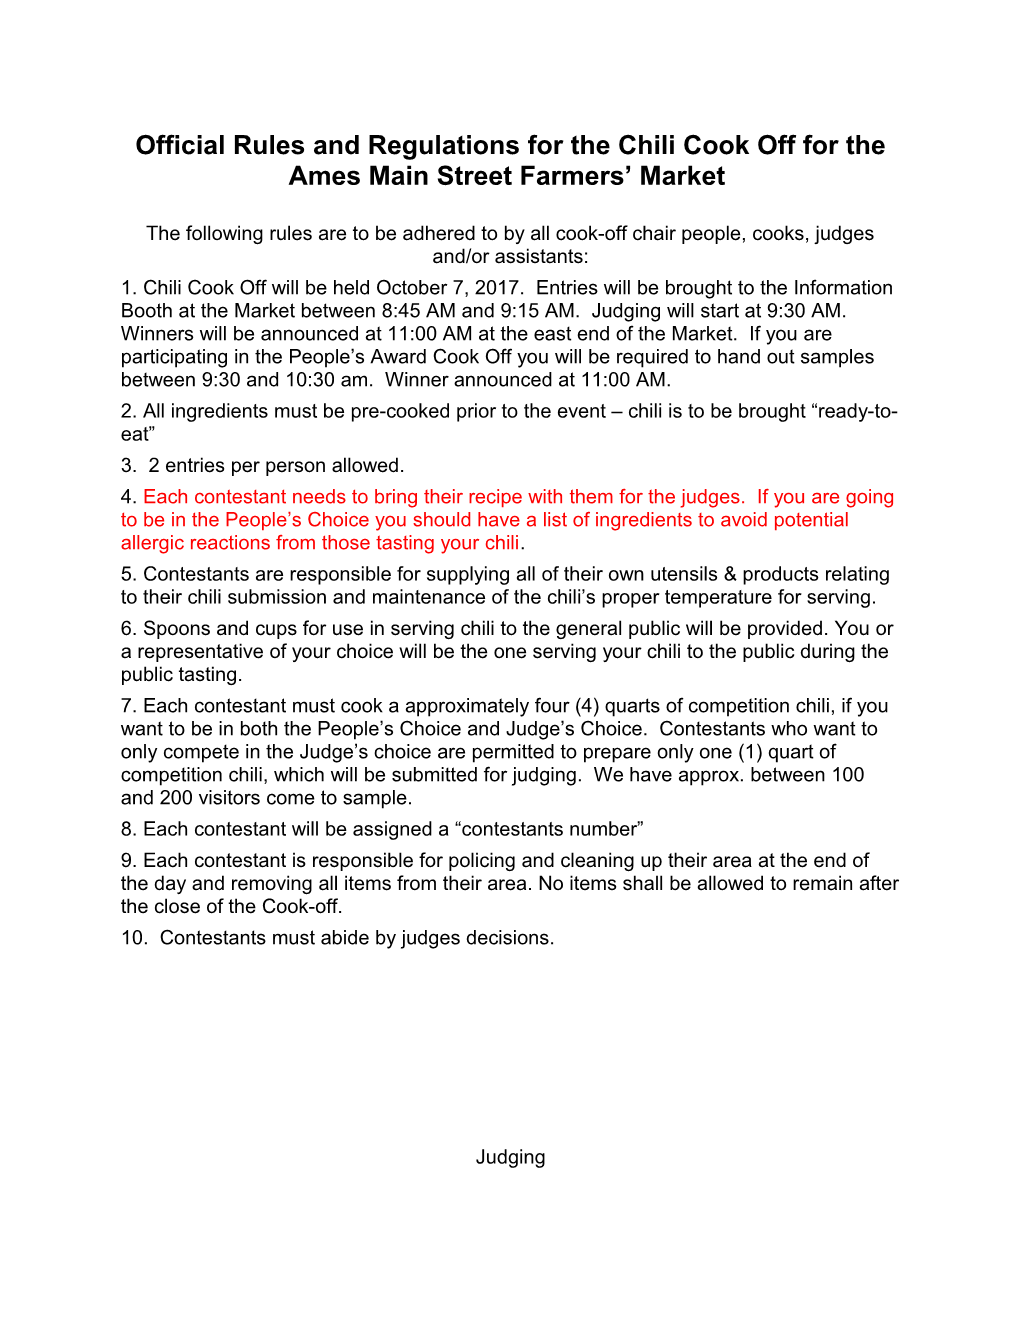 Official Rules and Regulations for the Chili Cook Off for the Ames Main Street Farmers Market